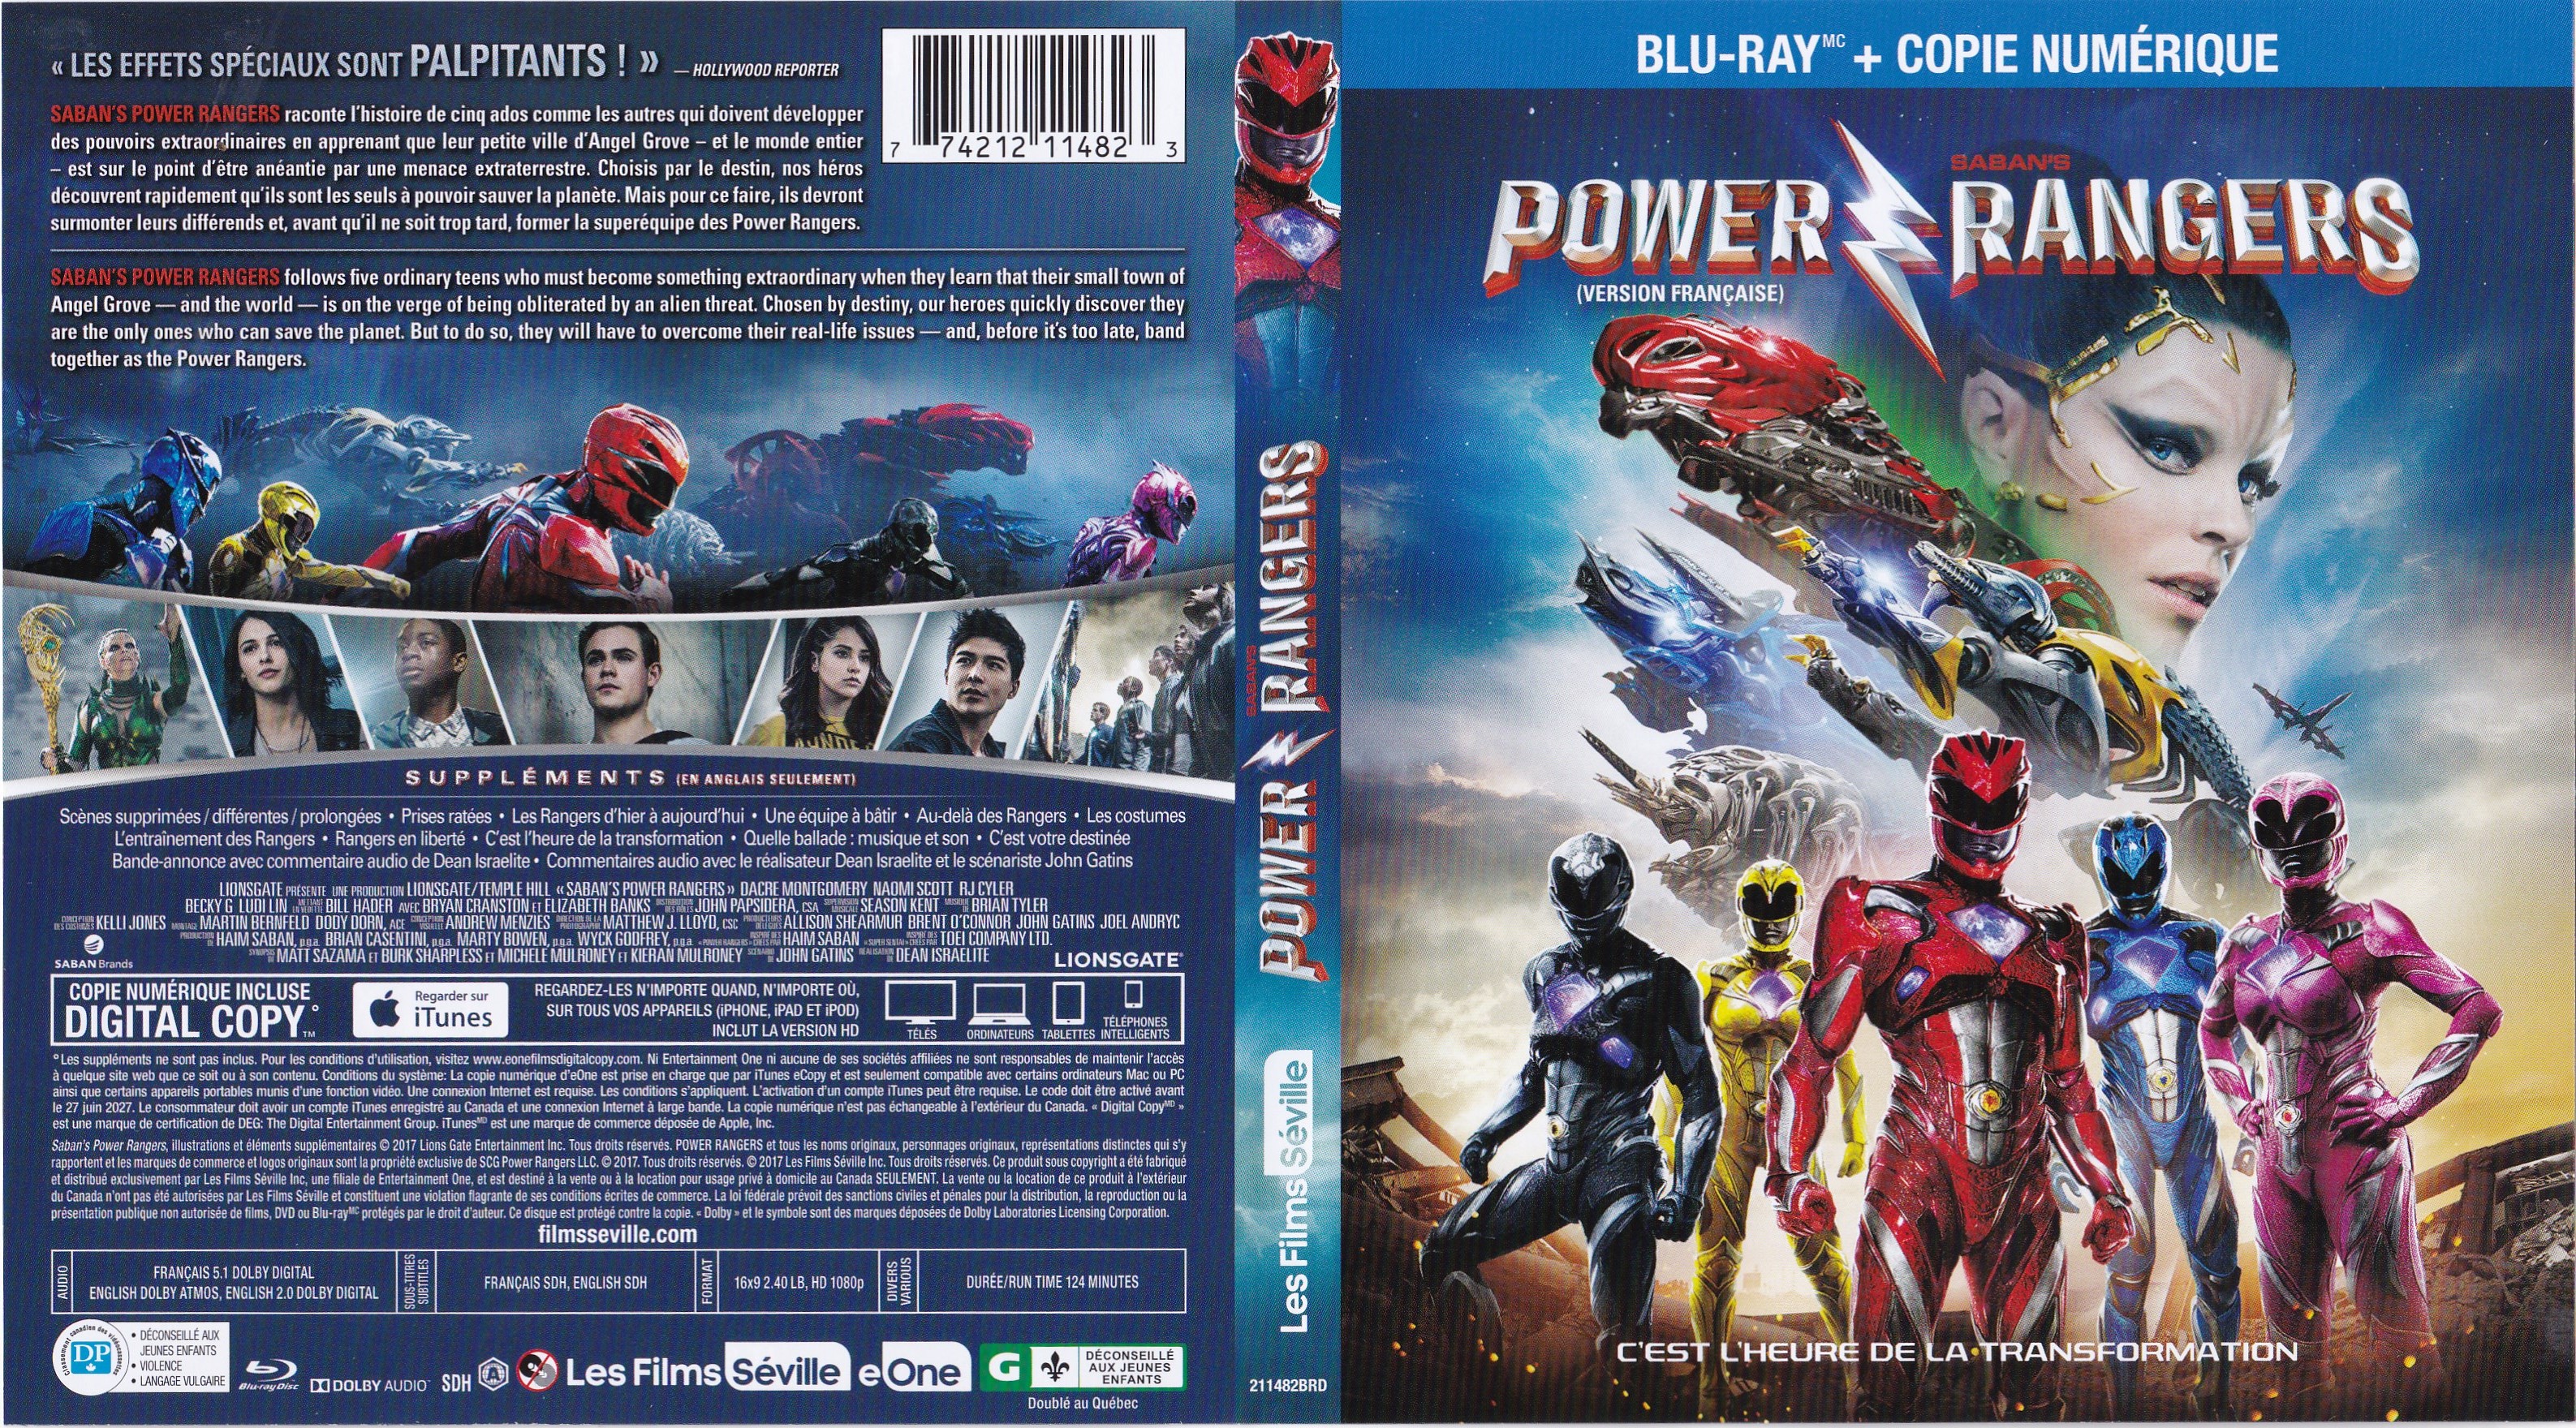 Jaquette DVD Power Rangers (Canadienne) (BLU-RAY)